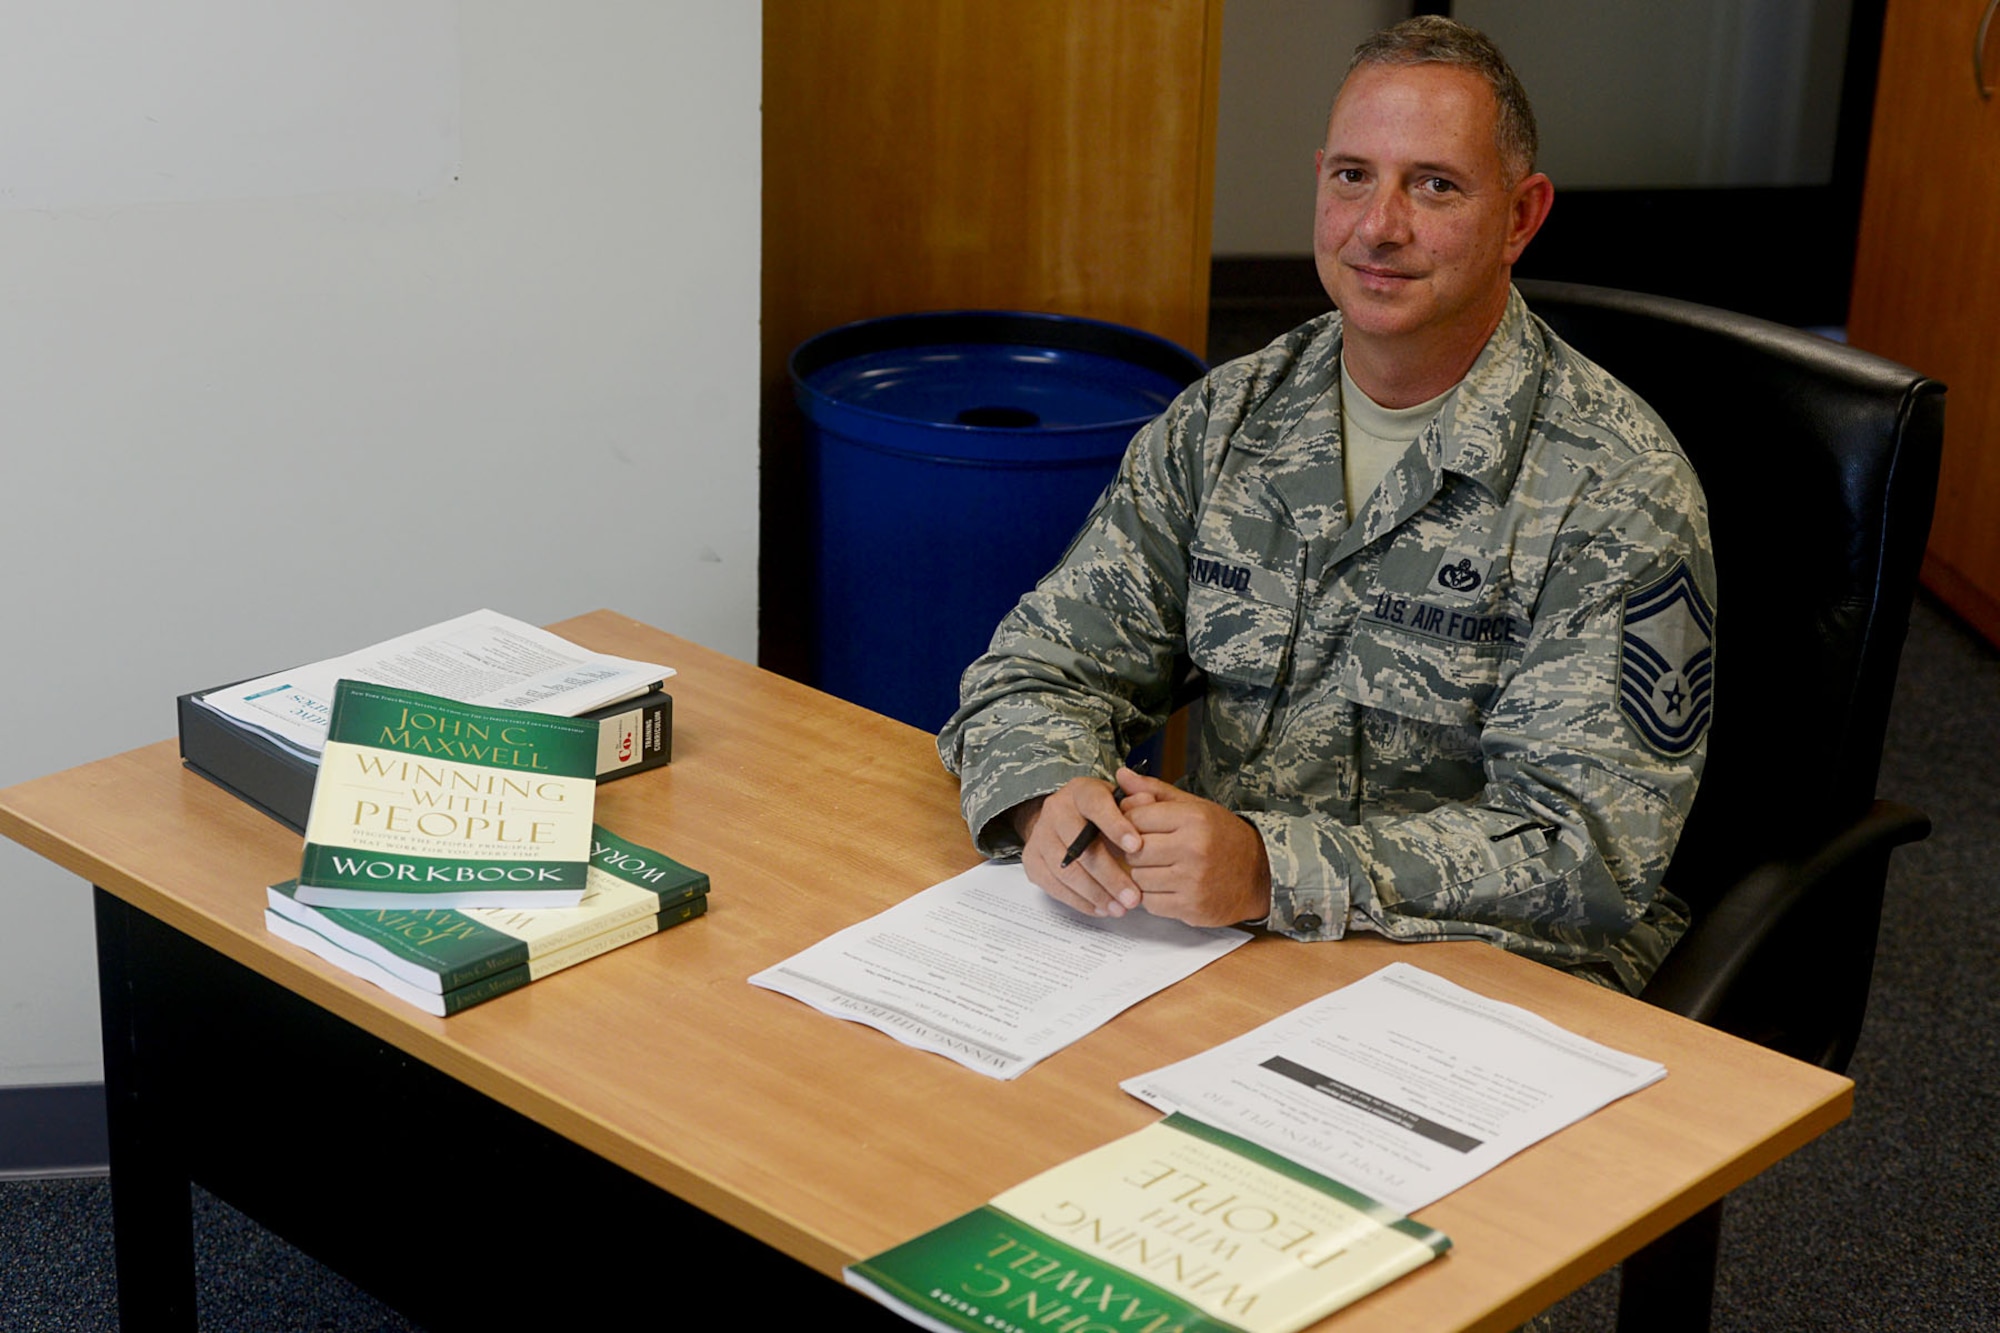 Senior Master Sgt. Randall Renaud, 633rd Civil Engineer Squadron superintendent of the engineering flight, received an Article 15 after an arrest for driving under the influence in 2002. Through dedication and resiliency, Renaud overcame every obstacle and dedicates his time in teaching others to do the same.